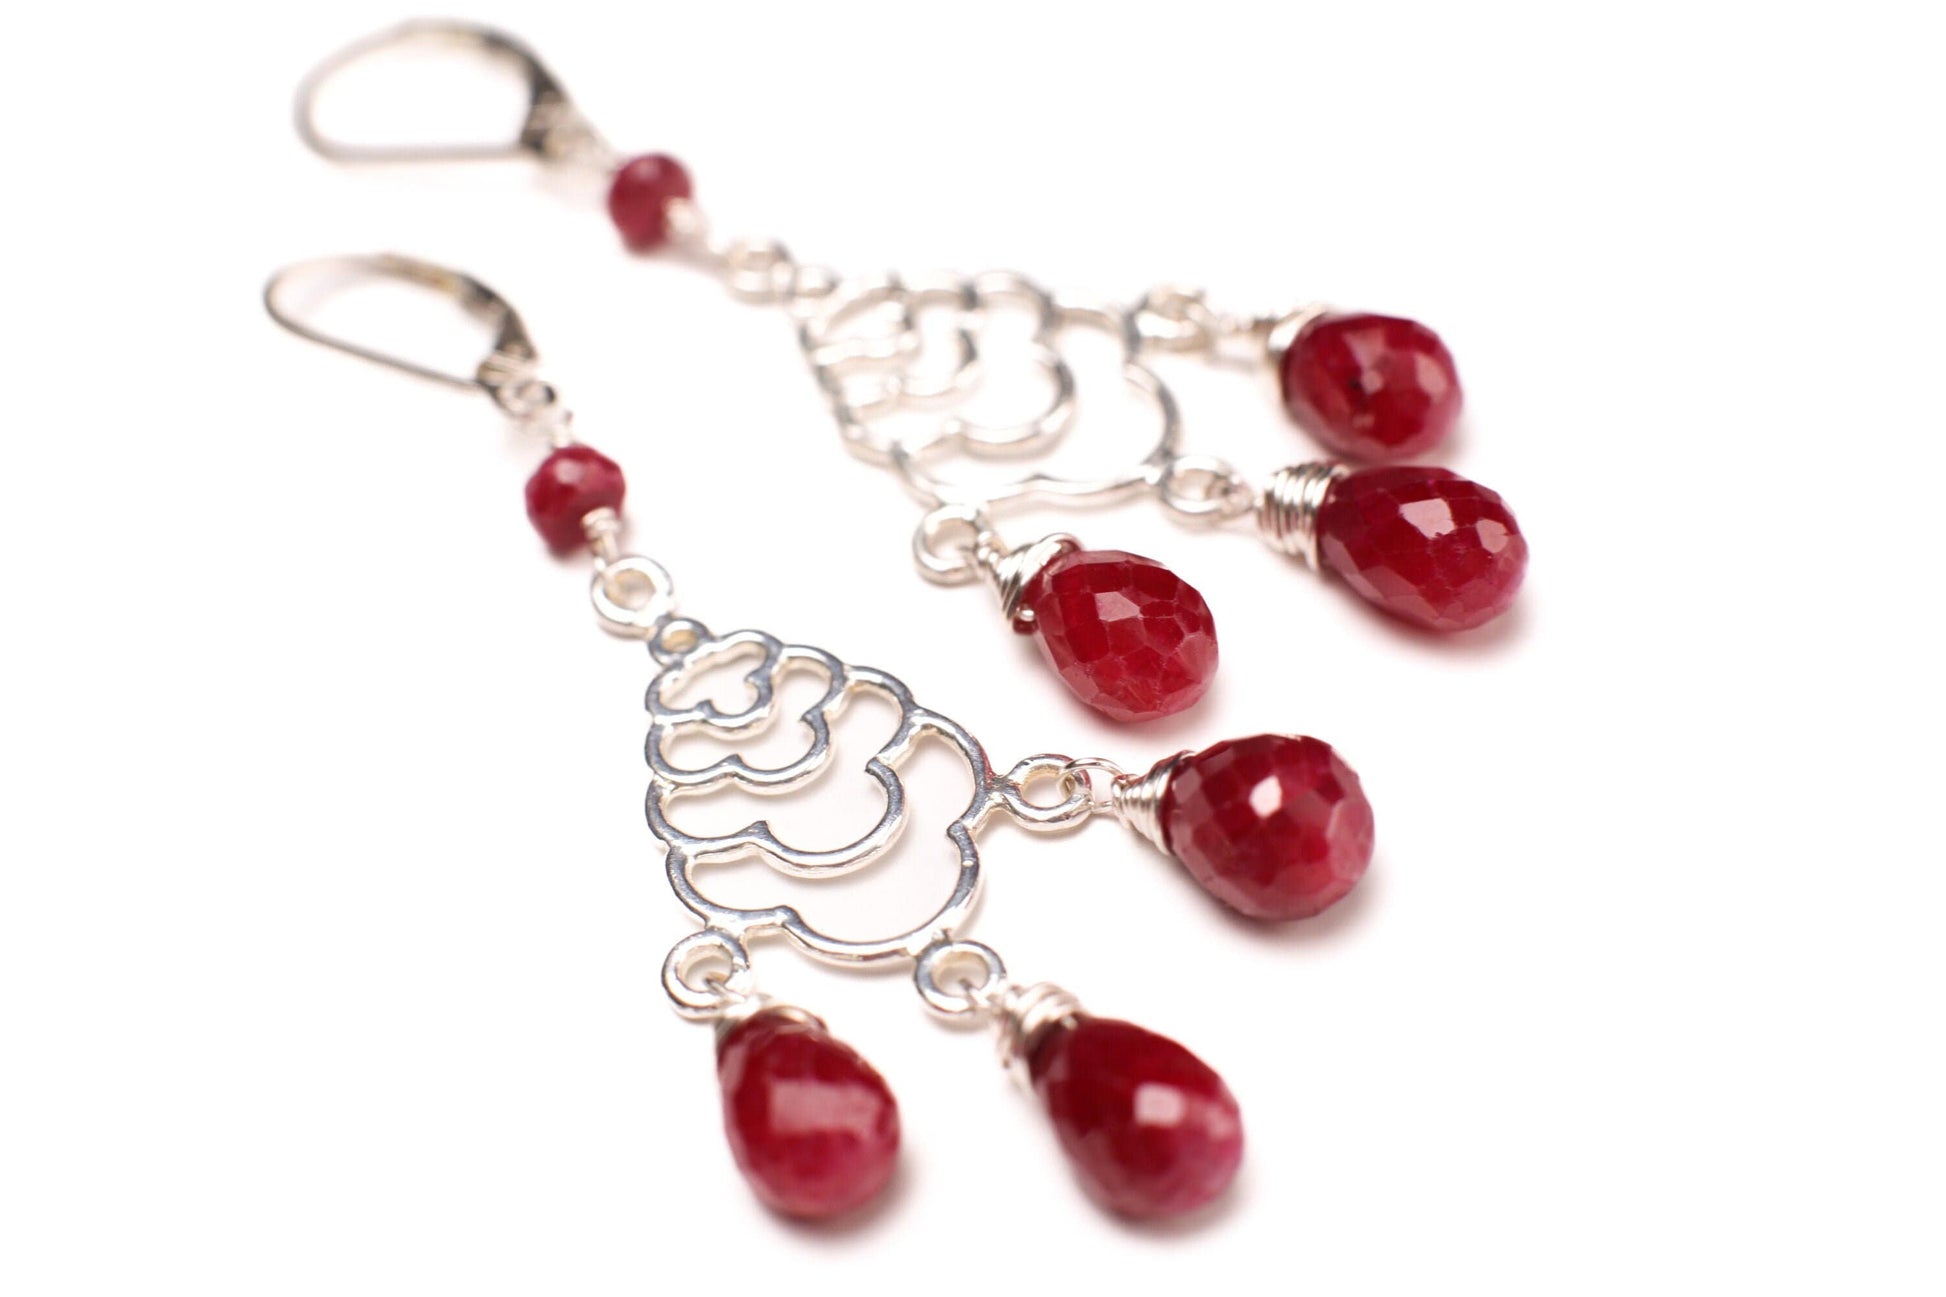 Genuine Ruby Wire Wrapped Dangling Briolette Earrings in 925 Sterling Silver Chandelier and Leverback Earwire, Bridal, Boho, Handmade Gift